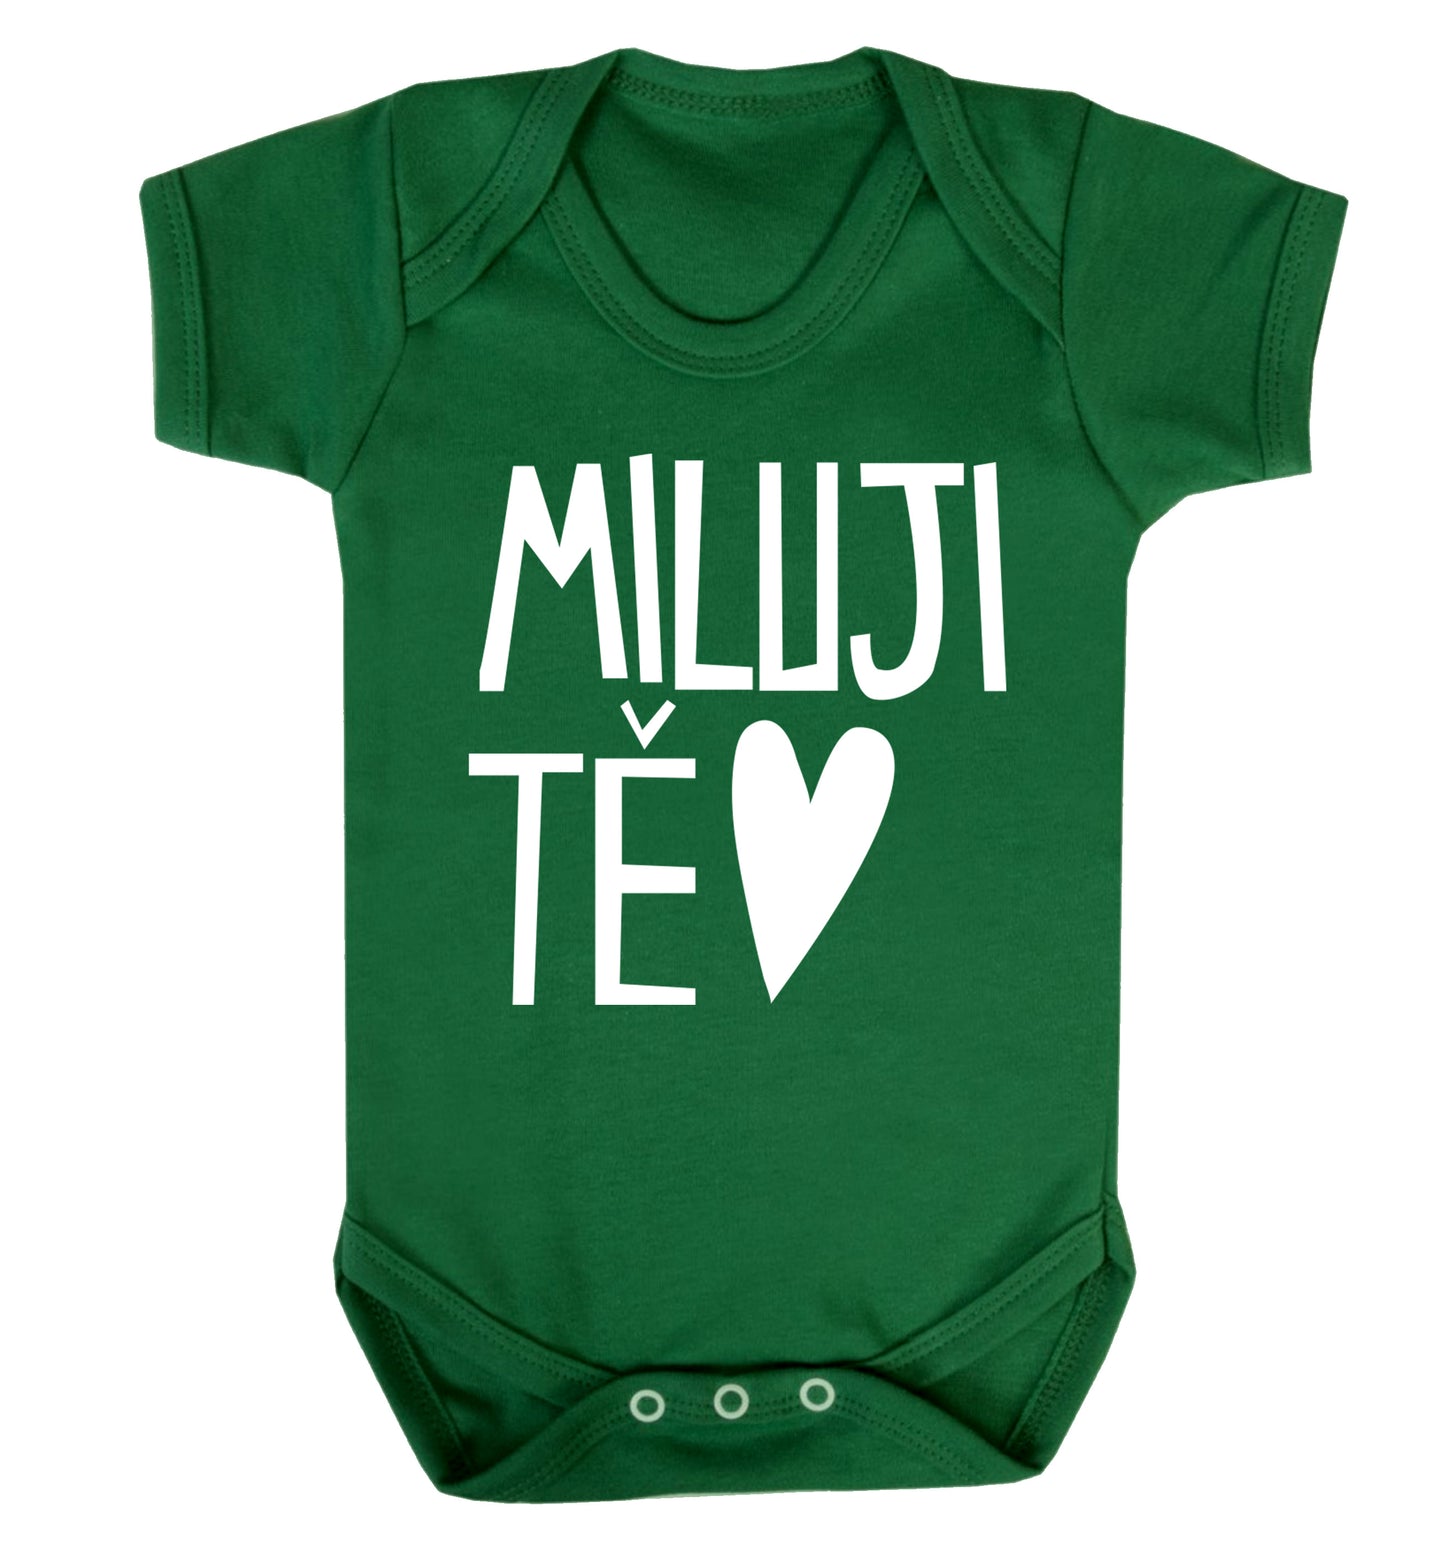 Miluji T_ - I love you Baby Vest green 18-24 months